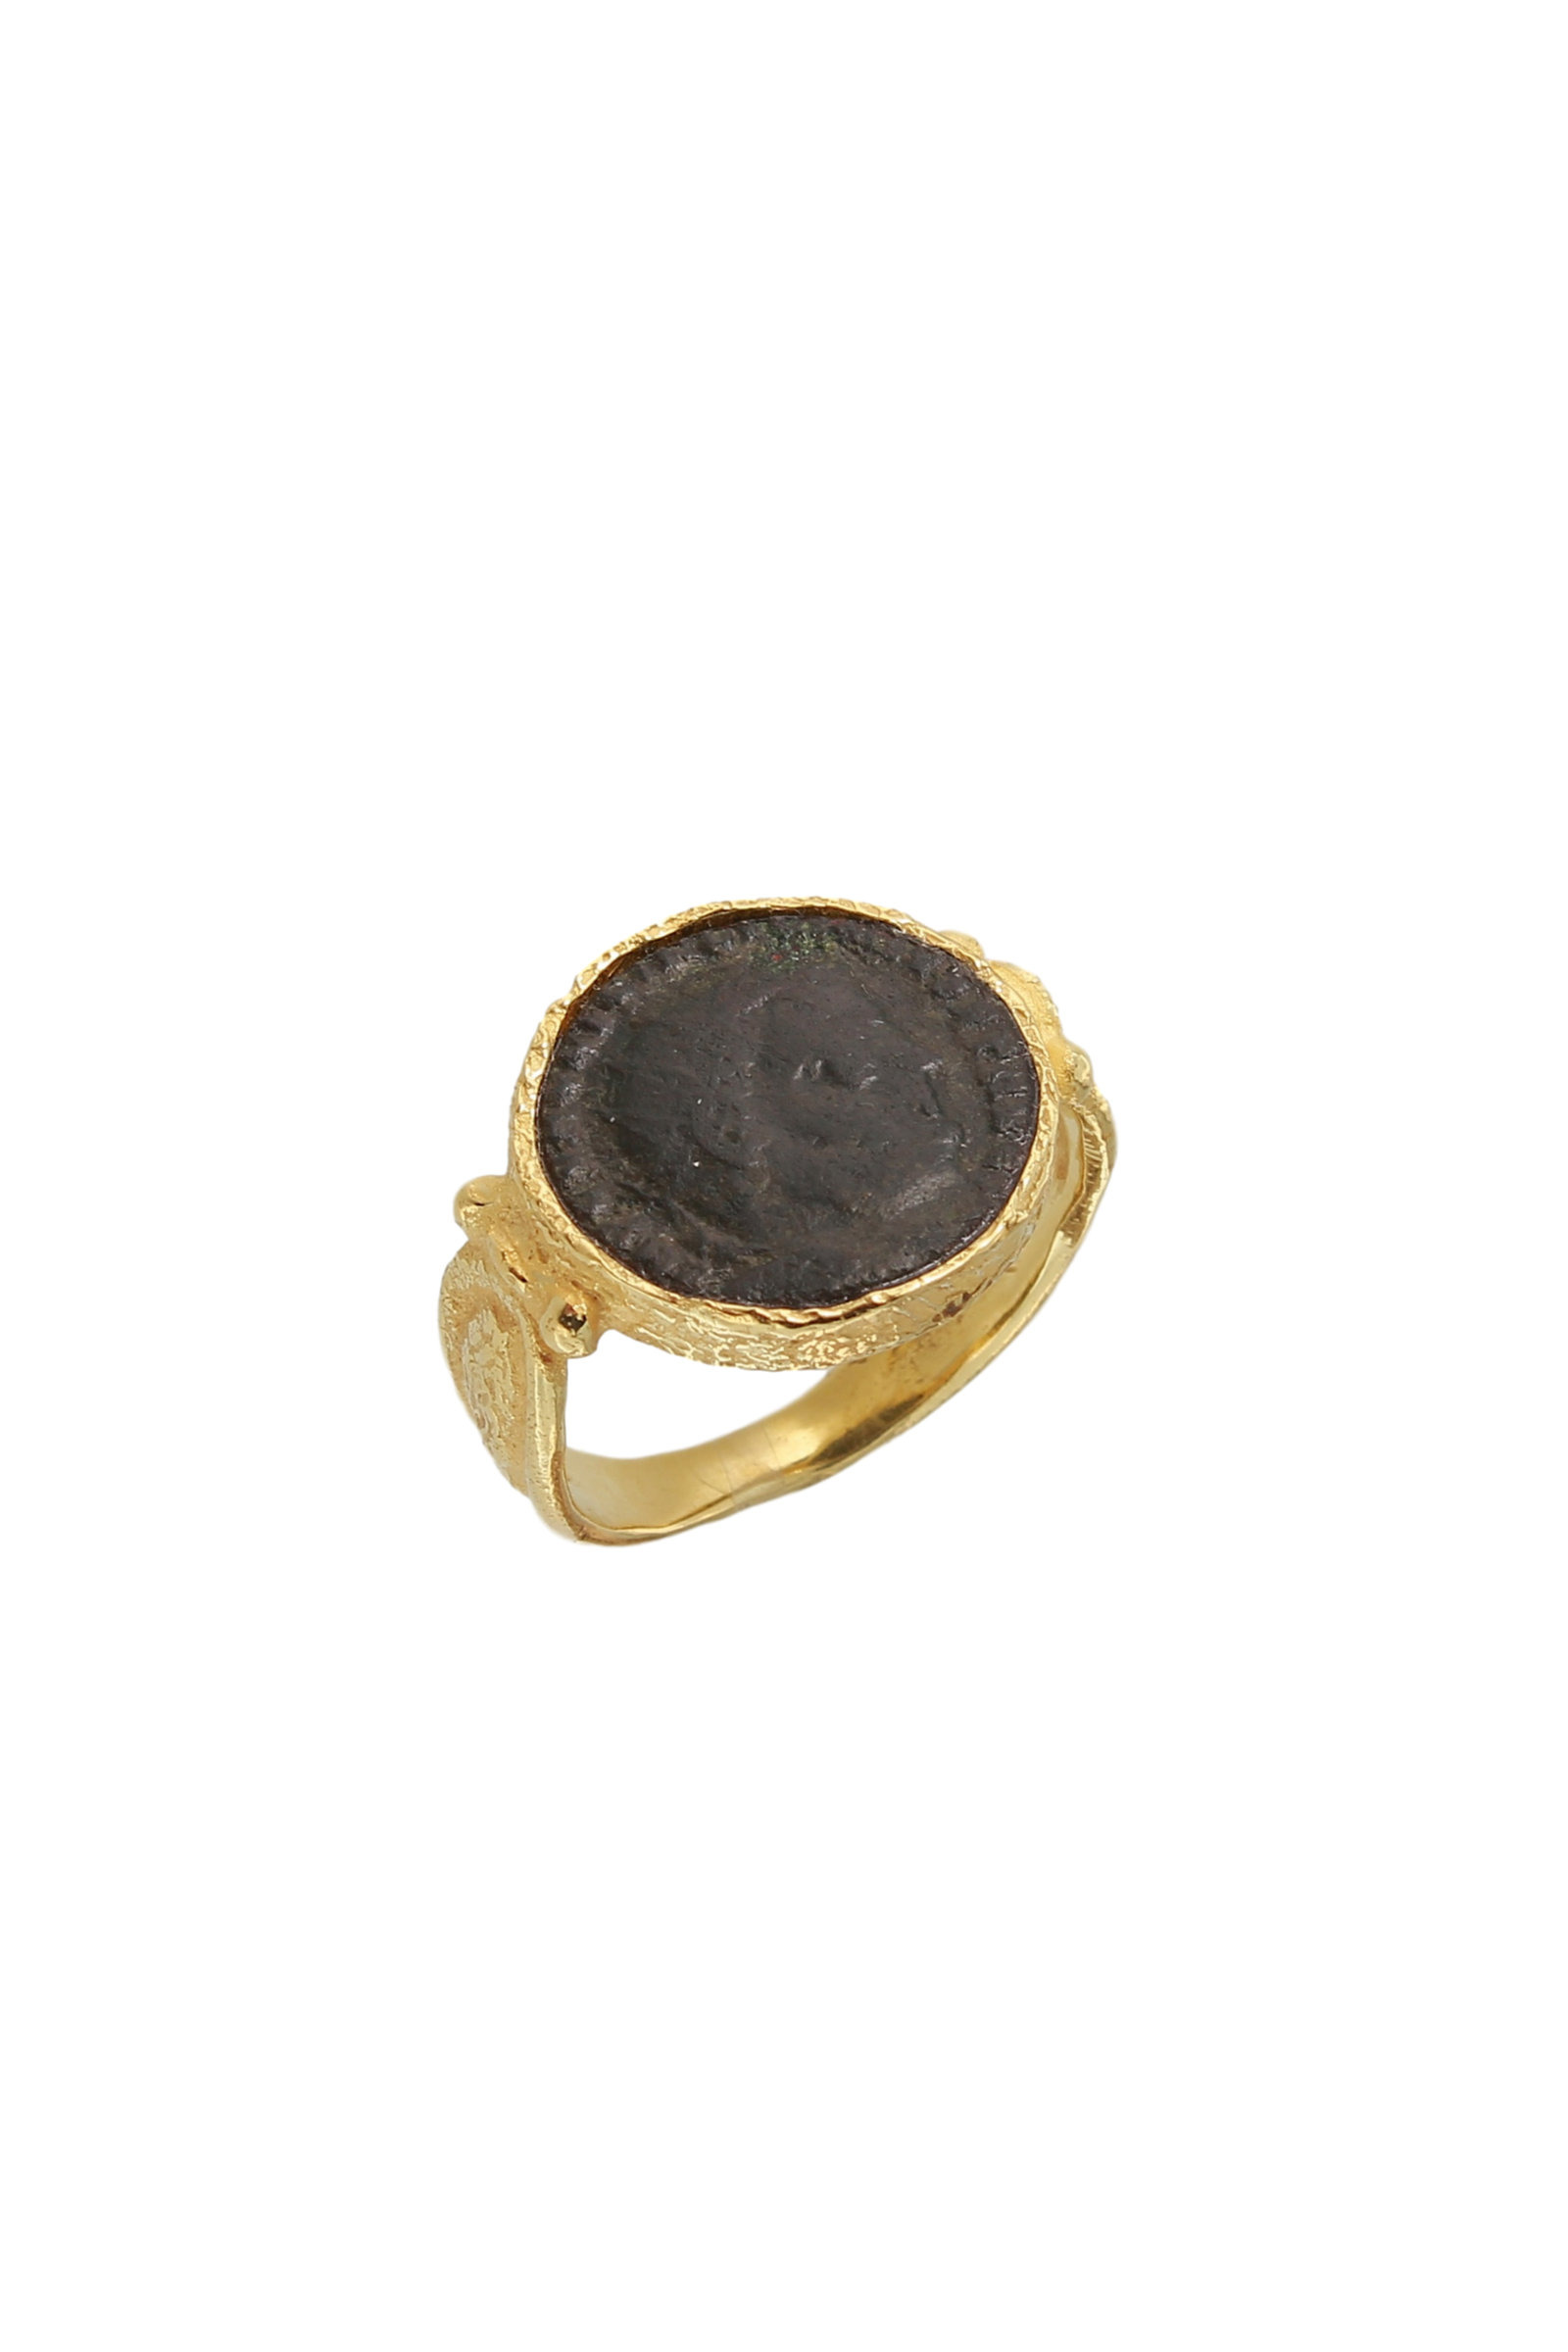 SE667A-18-Kt-Yellow-Gold-Ring-with-Roman-Coin-1